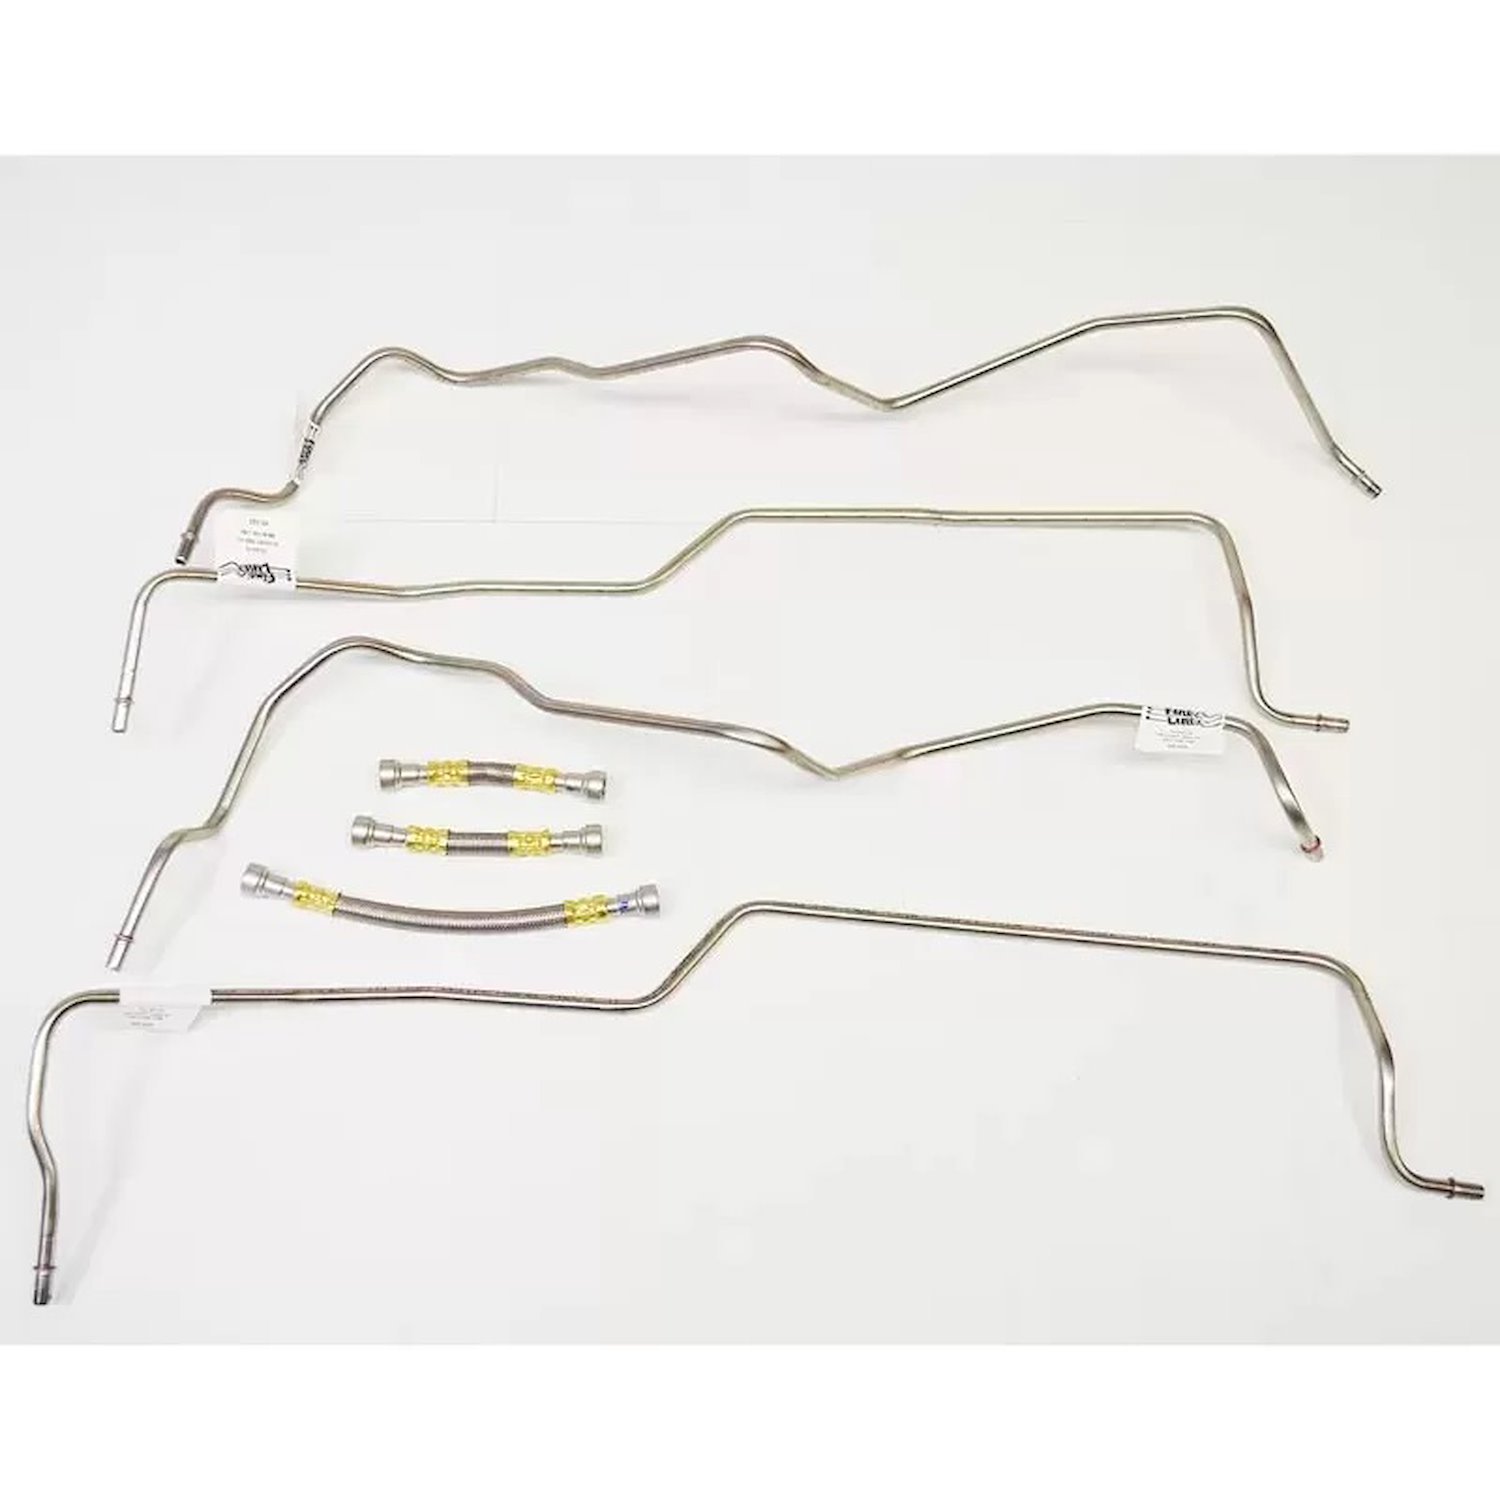 Complete Fuel Line Kit for 2004-2010 GM 2500, 3500 HD 6.0L Gas w/Regular Cab, Long Bed [Stainless Steel]